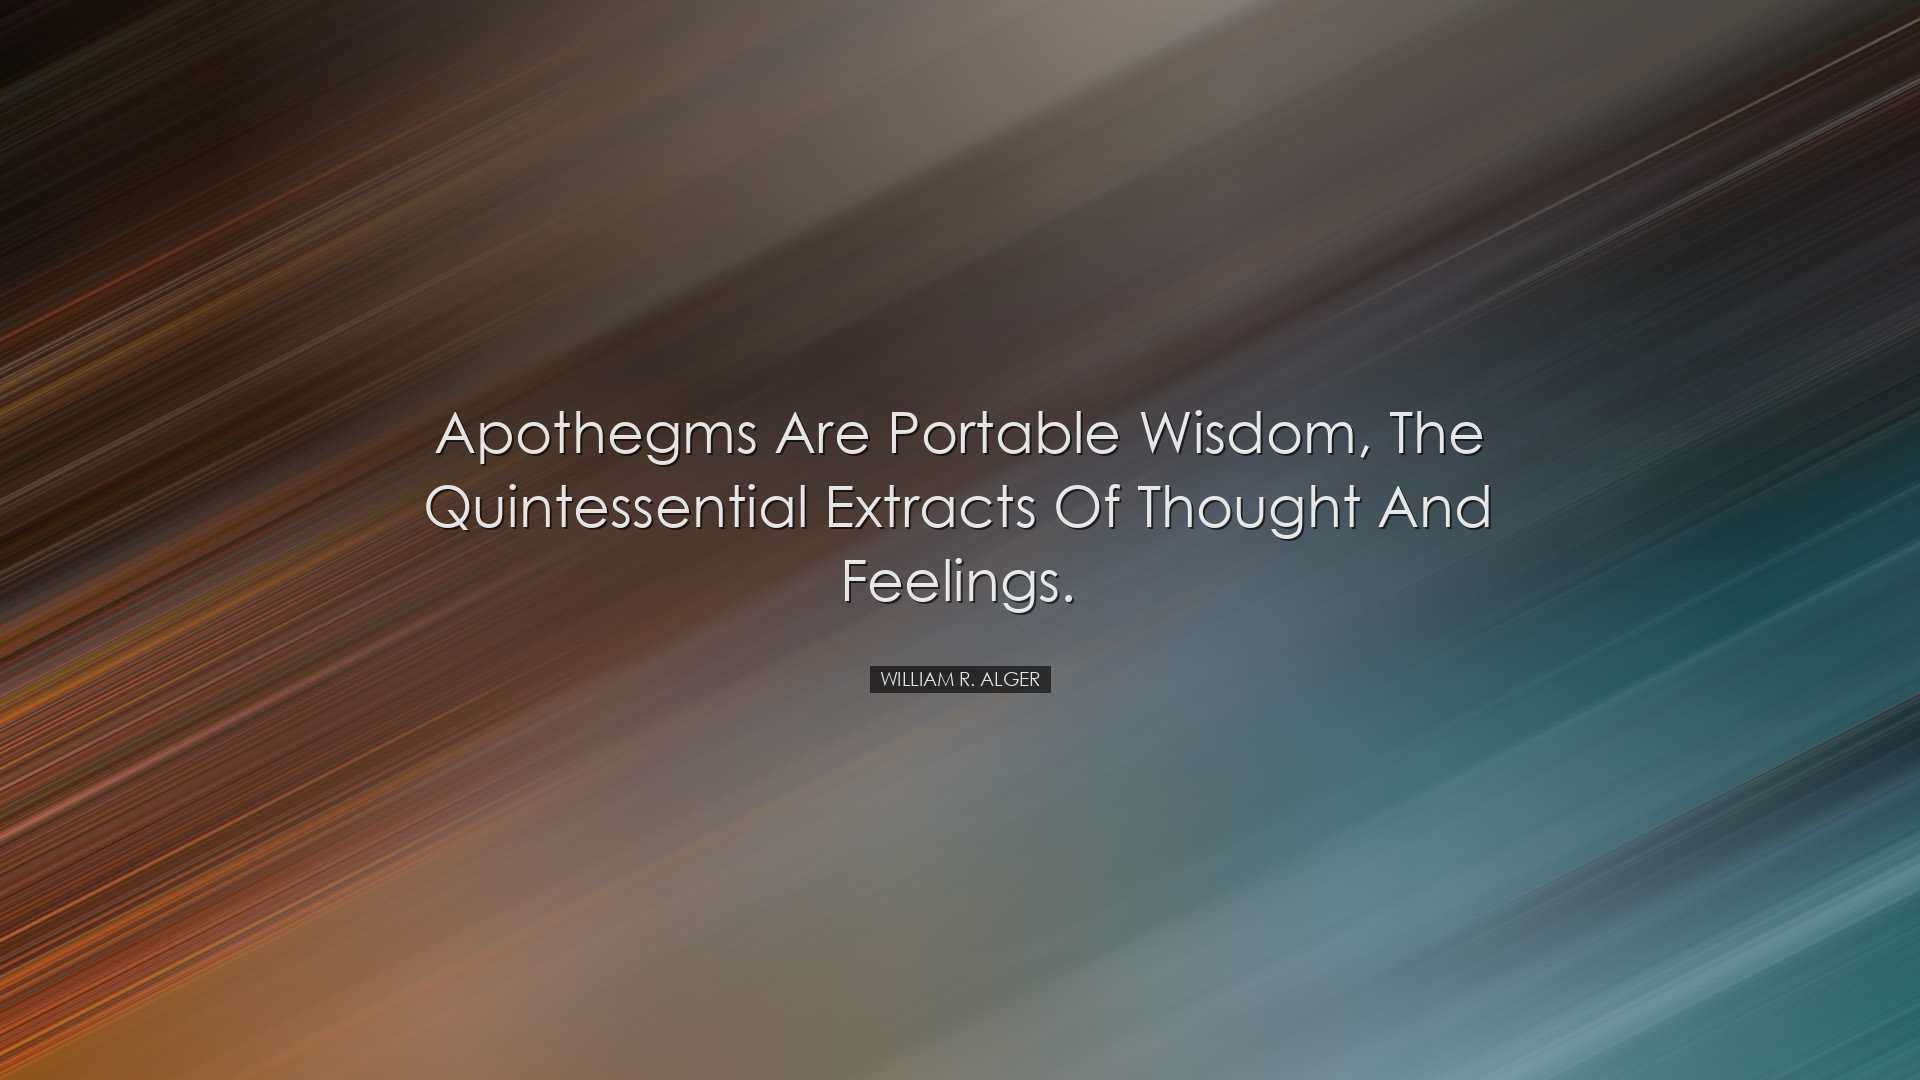 Apothegms are portable wisdom, the quintessential extracts of thou